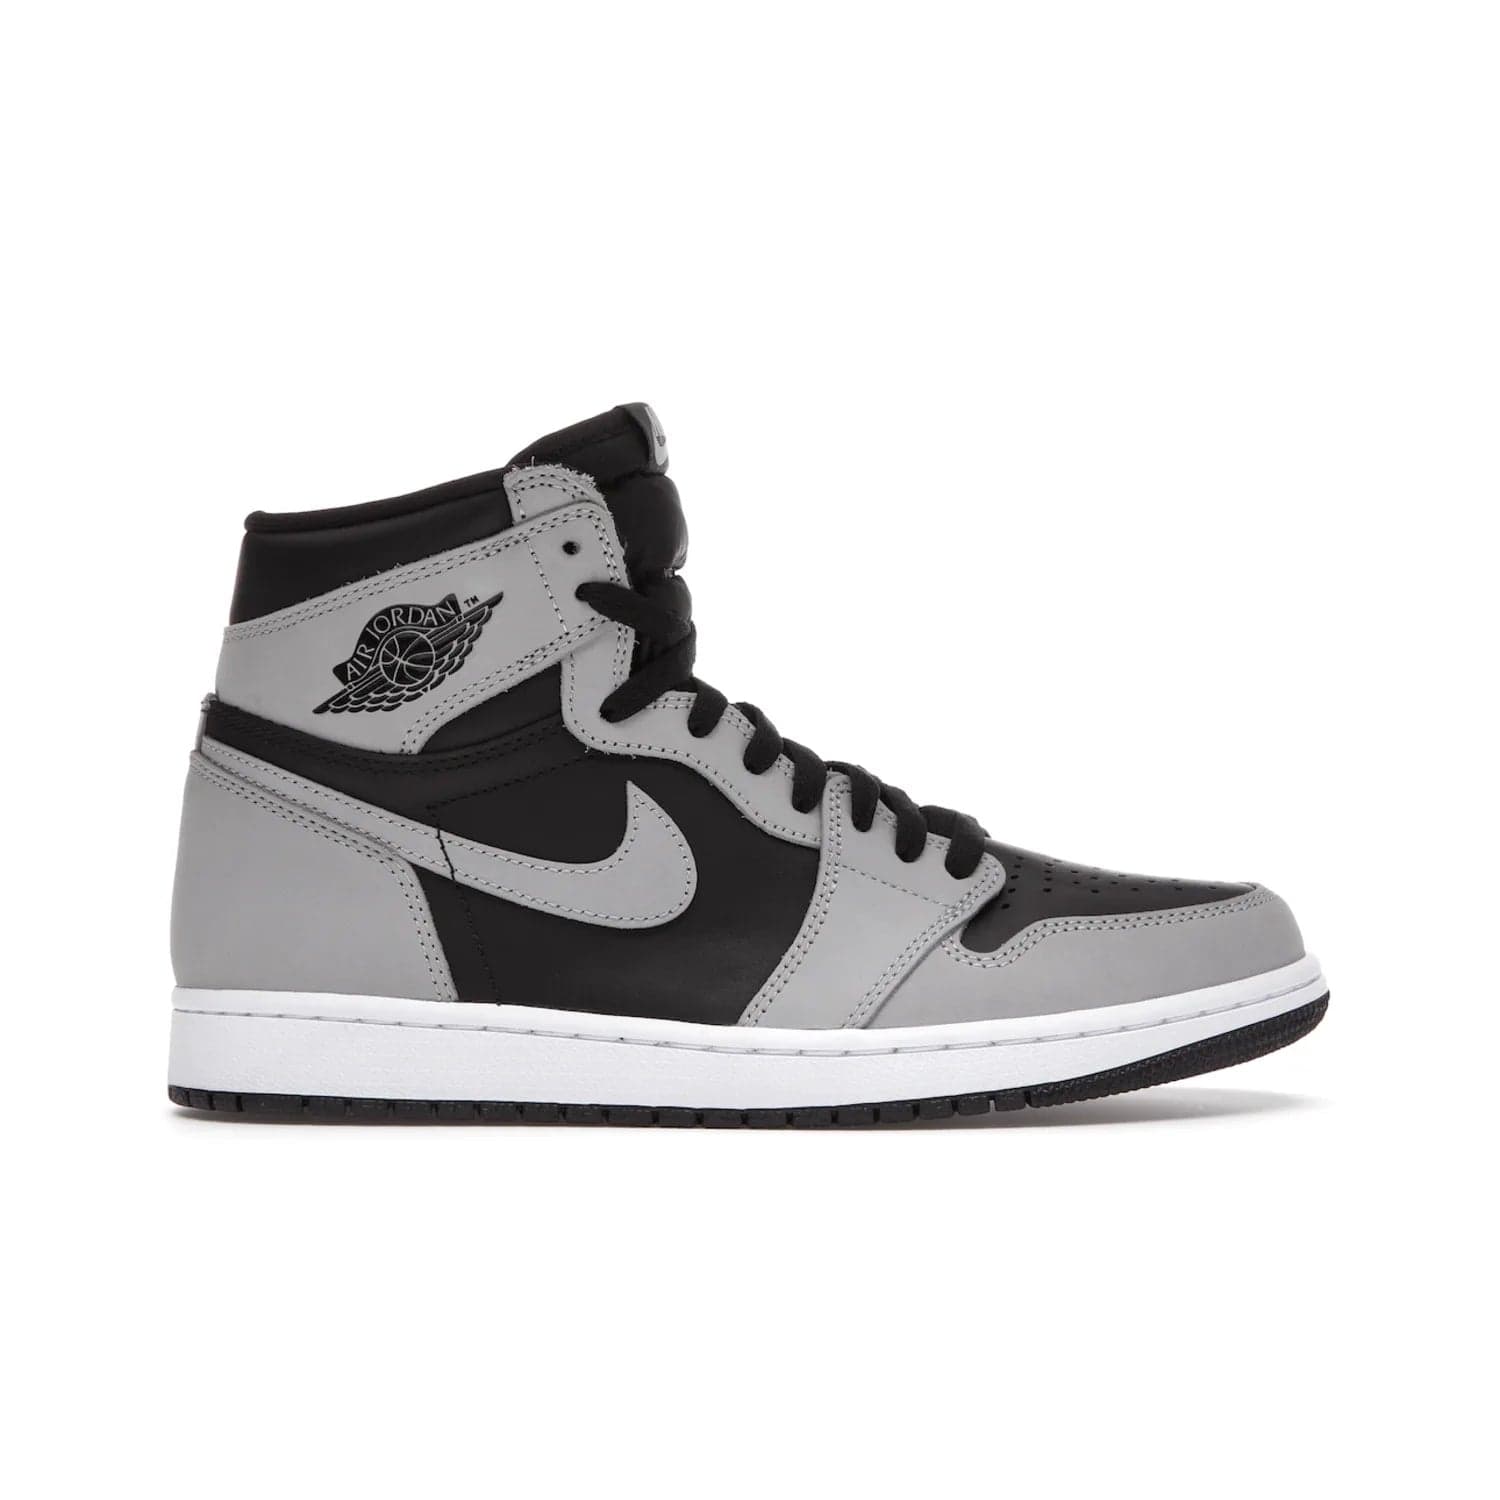 Jordan 1 Retro High Shadow 2.0 - Image 1 - Only at www.BallersClubKickz.com - #
Classic Air Jordan 1 Retro High Shadow 2.0 with black leather base and Light Smoke Grey overlays. Released in May 2021.